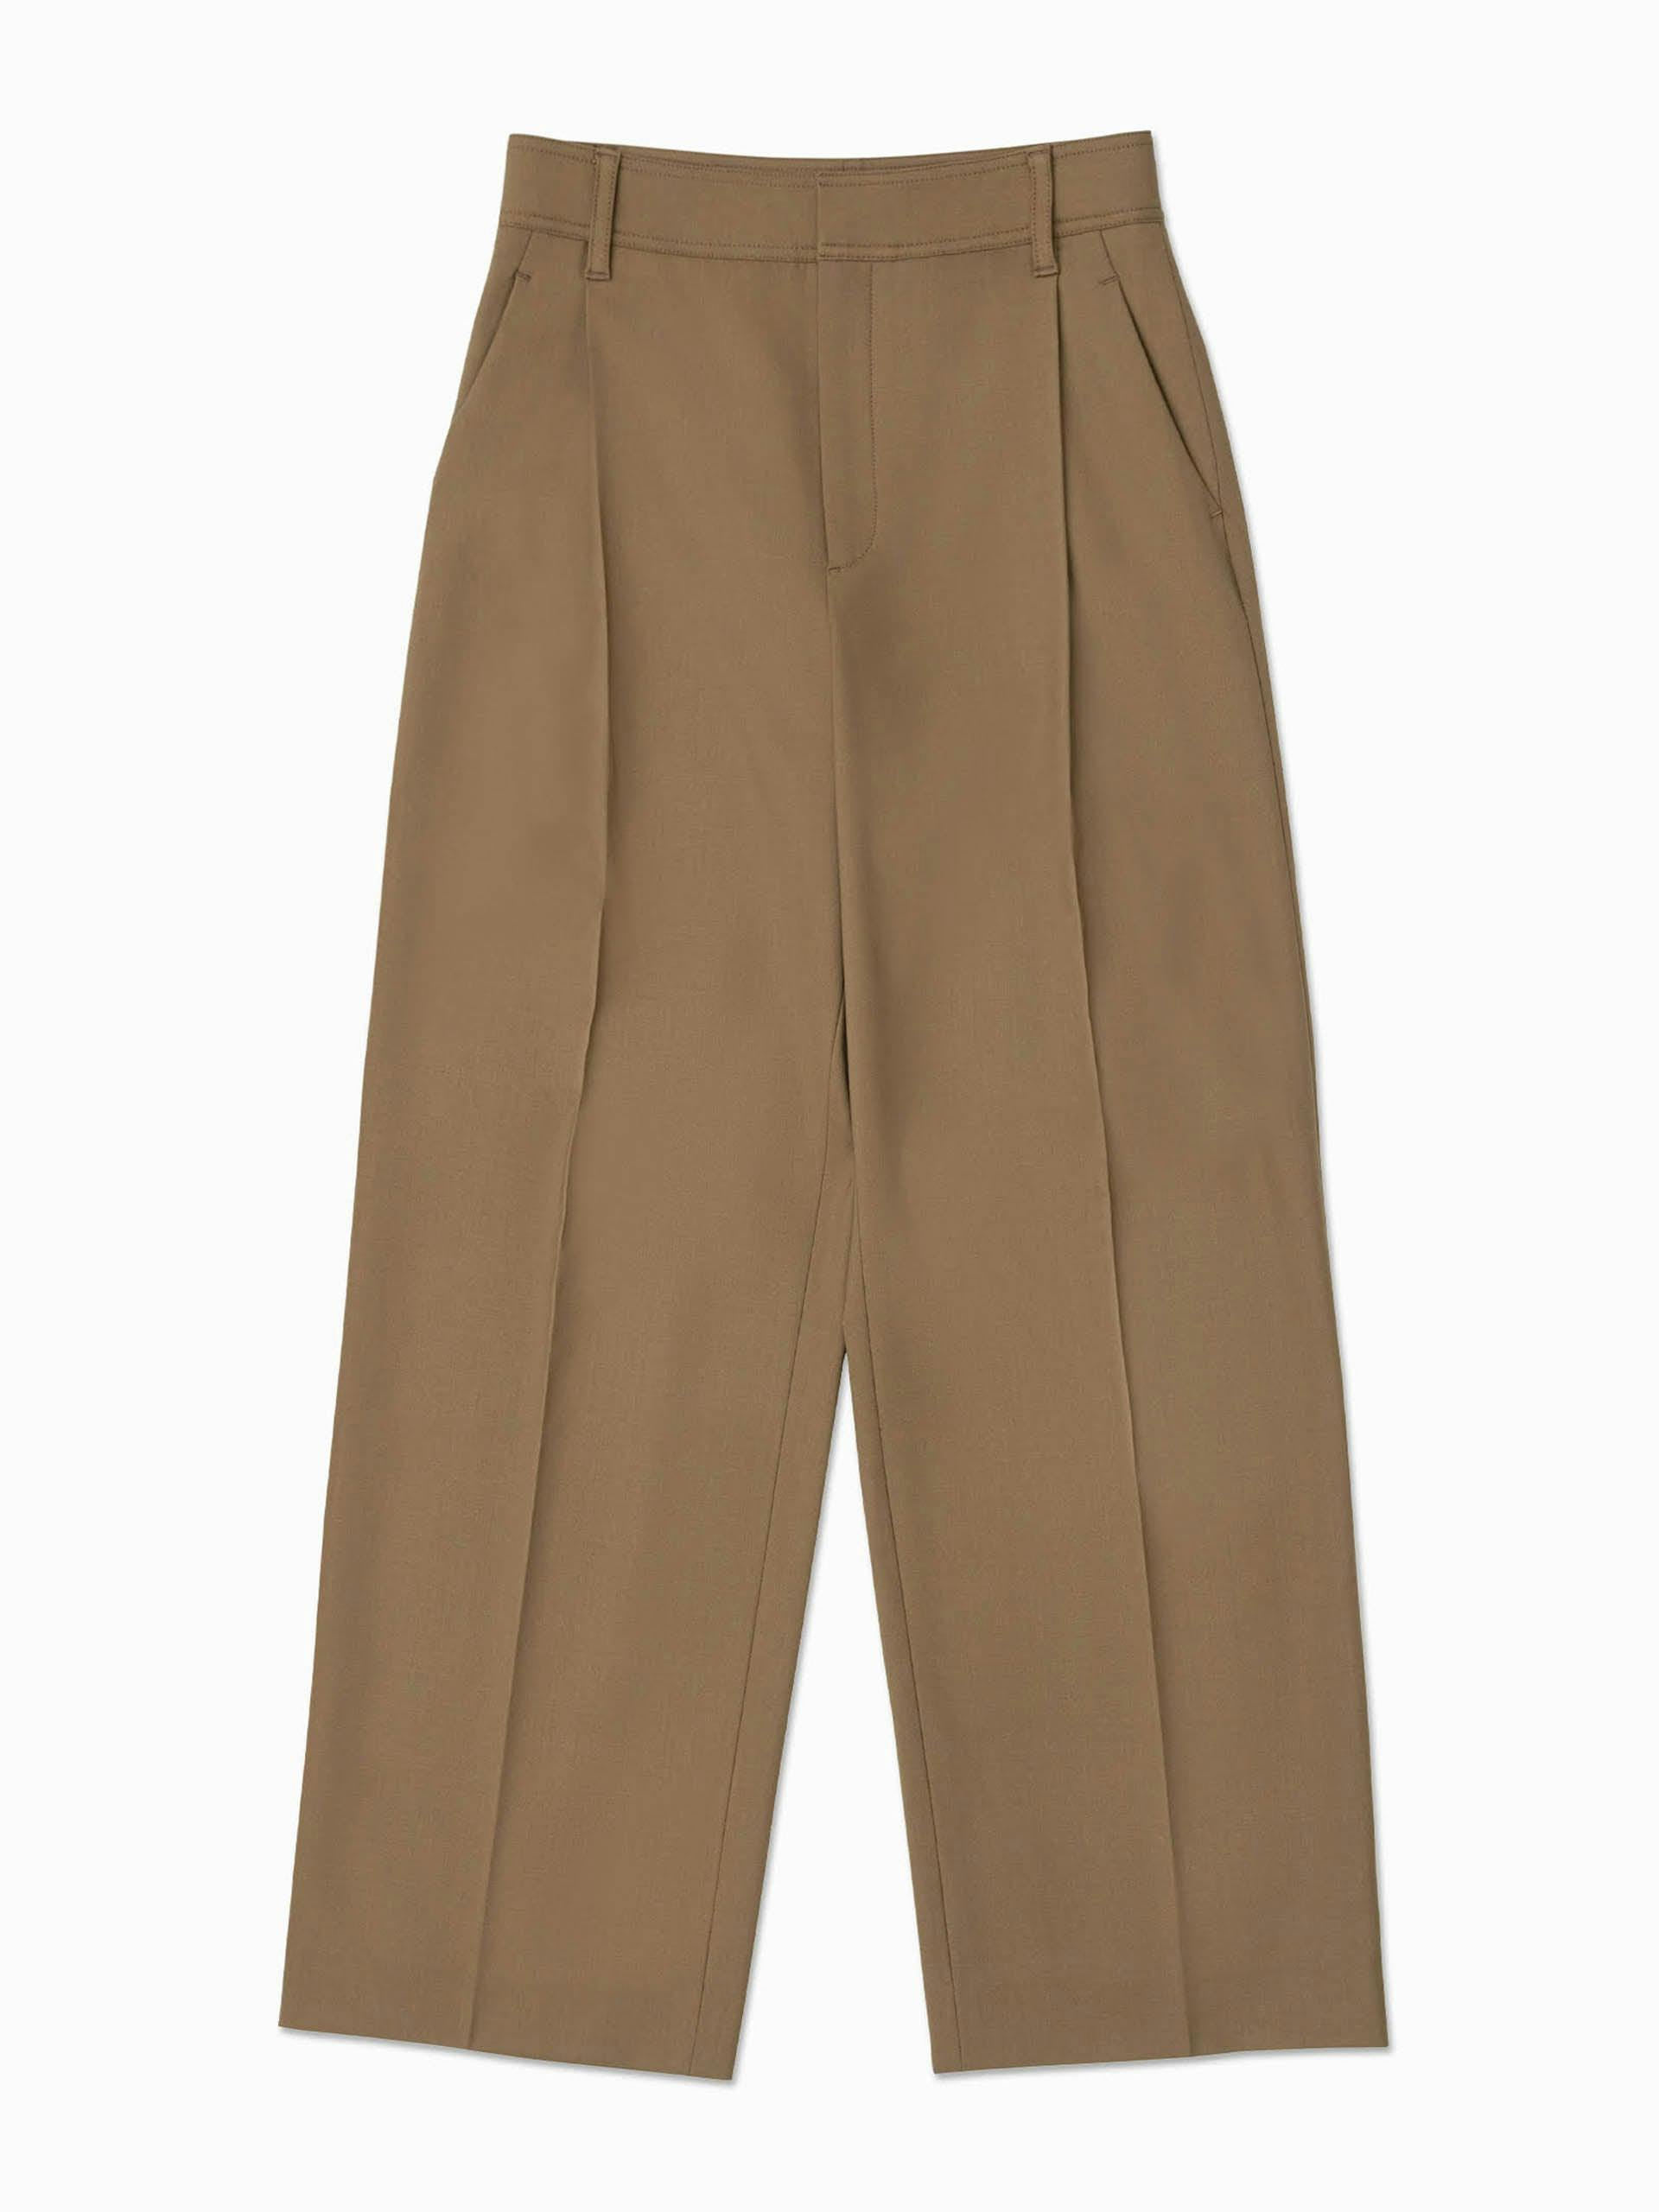 Toffee mid rise pleat front trouser